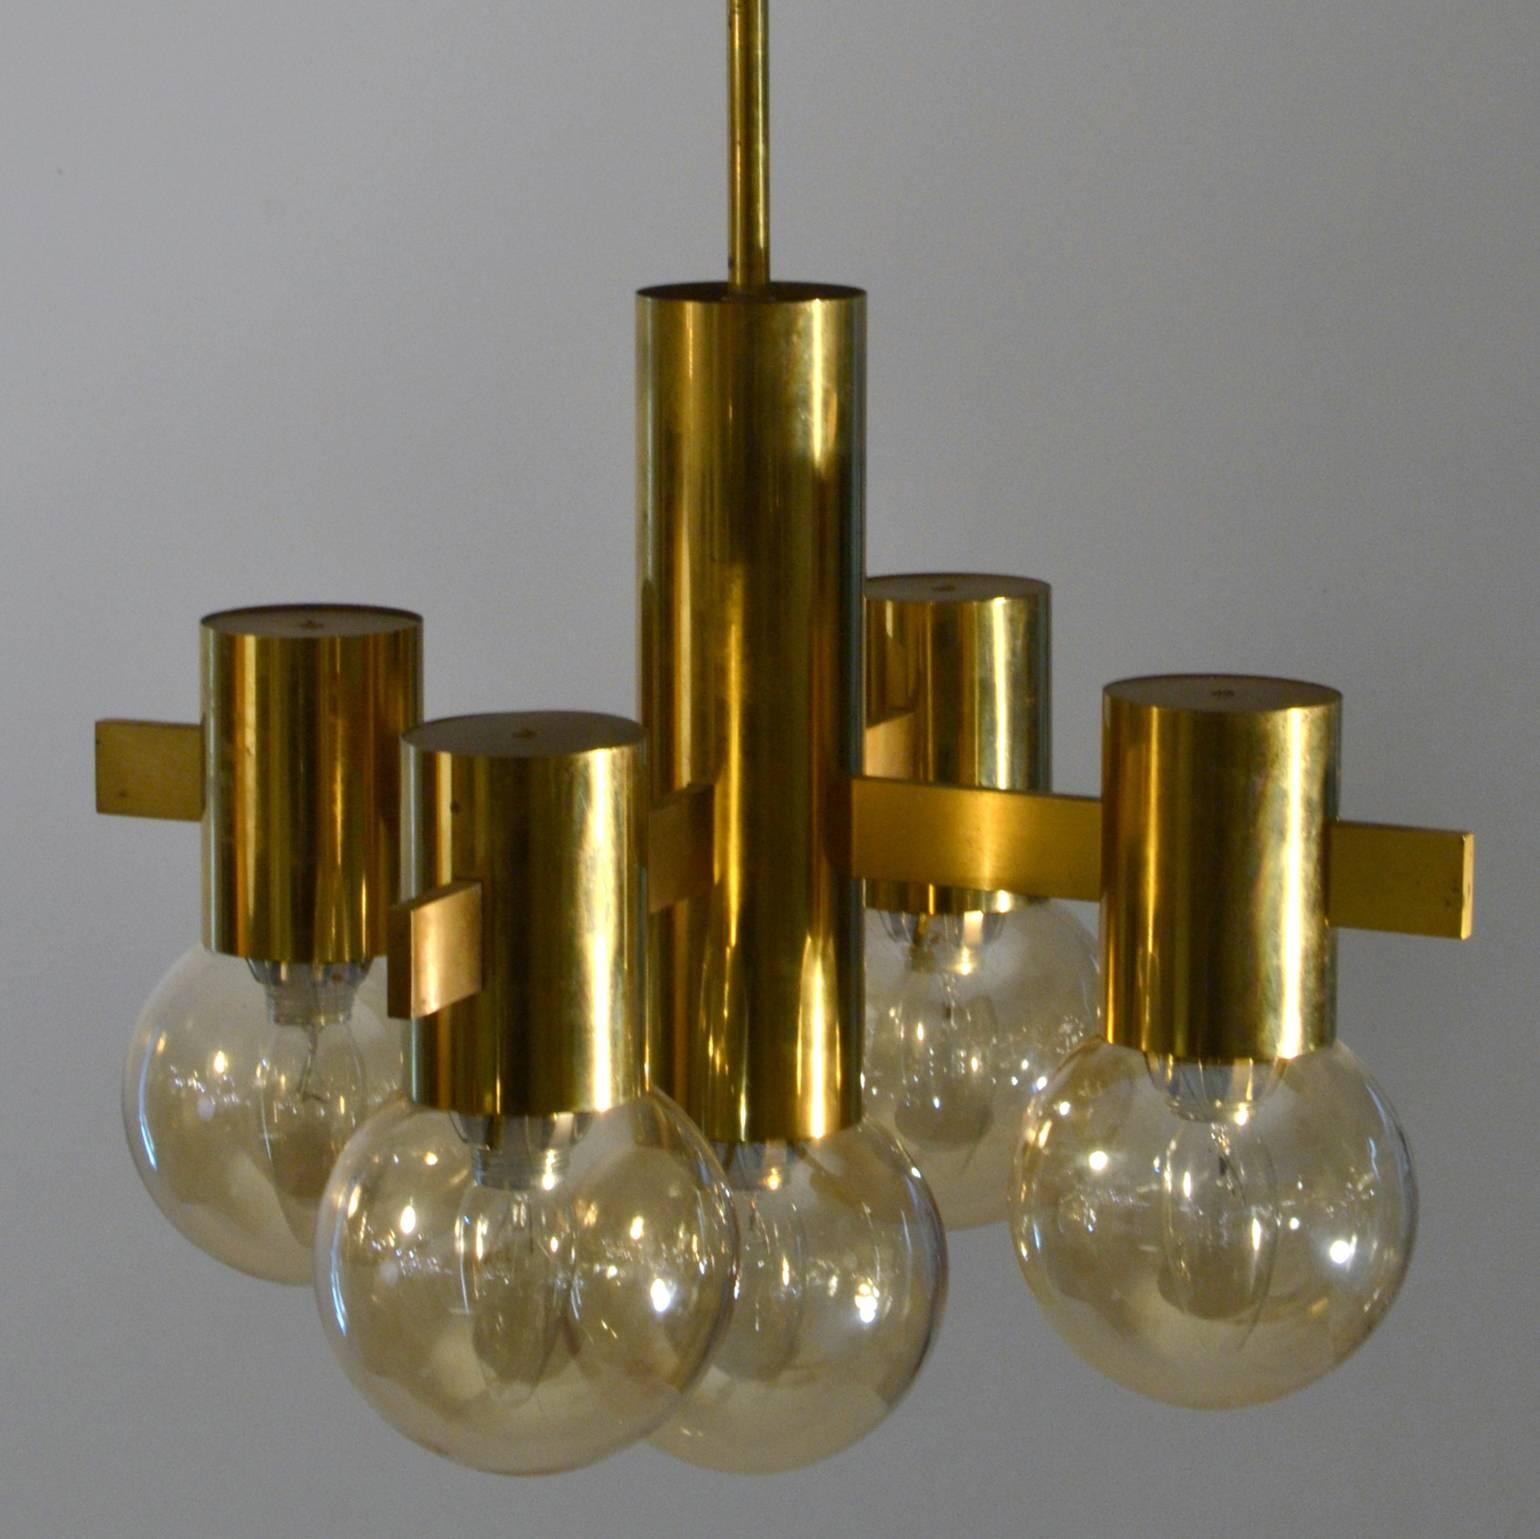 Brass Sciolari pendant with five honey glass globes, Italy, 1970s.

The height of the stem can be adjusted on request.
The light is rewired and ready for immediate use.